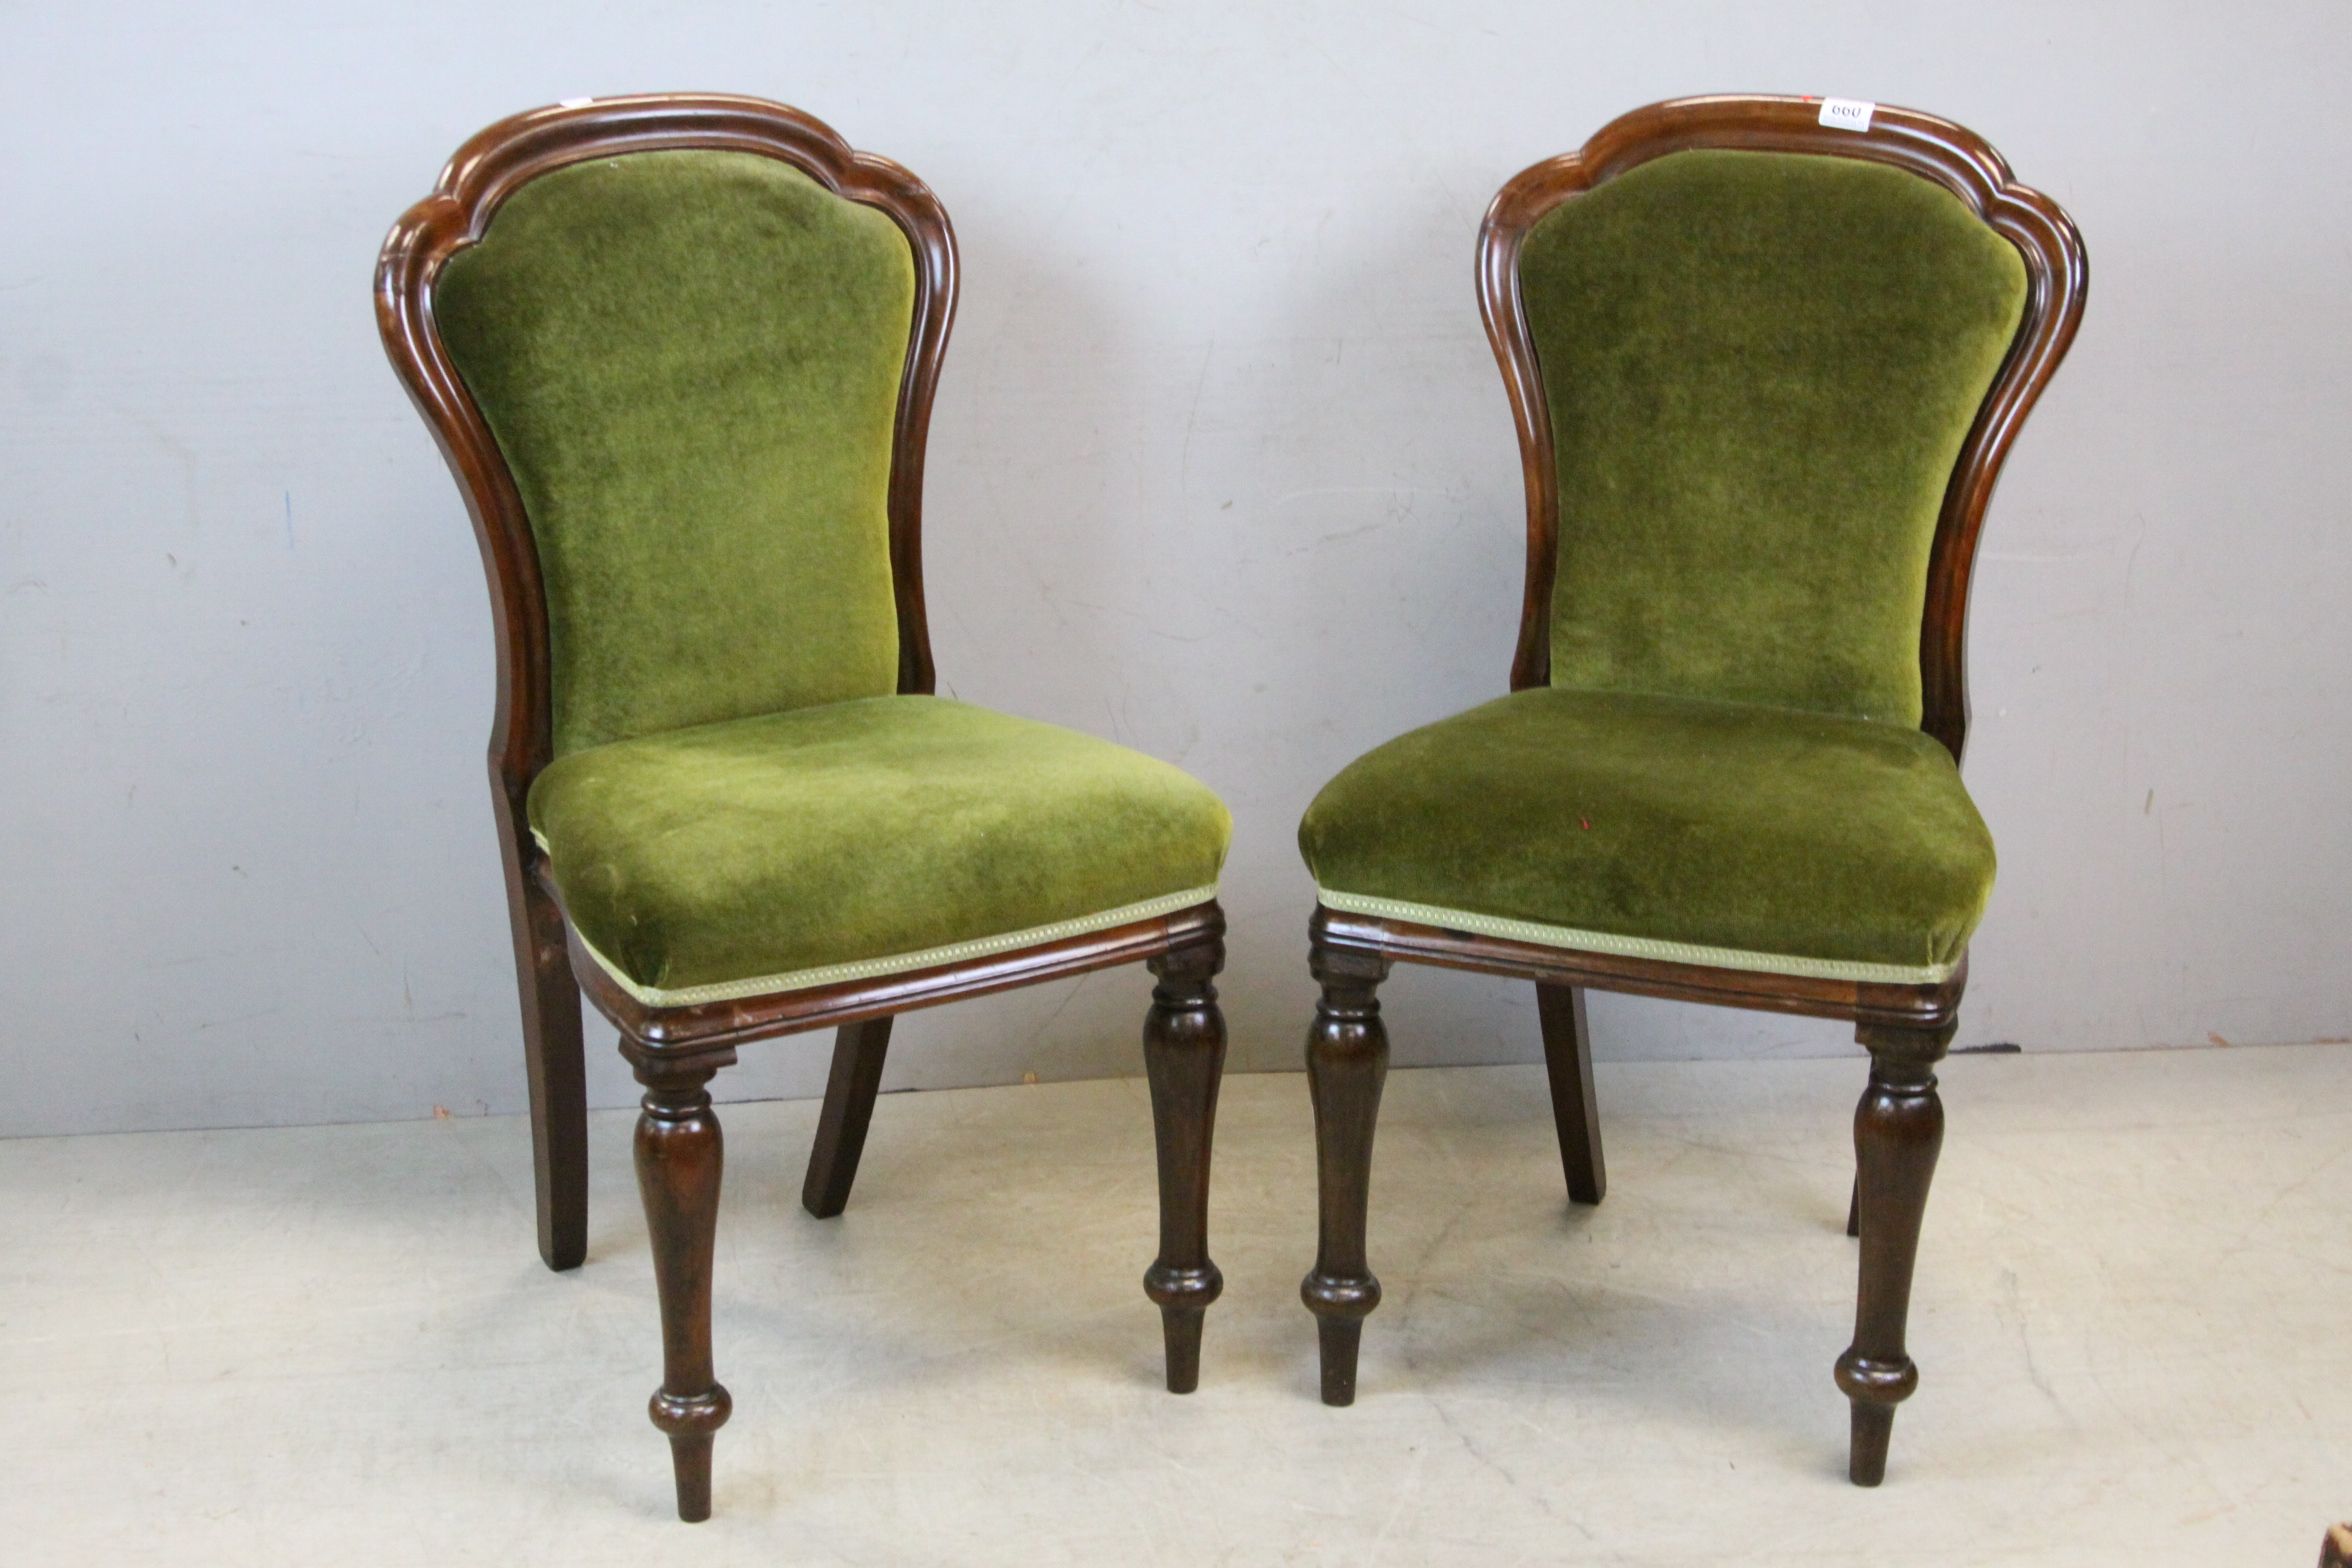 Pair of Victorian Mahogany Spoon Back Dining Chairs with Green Upholstered Backs and Seats